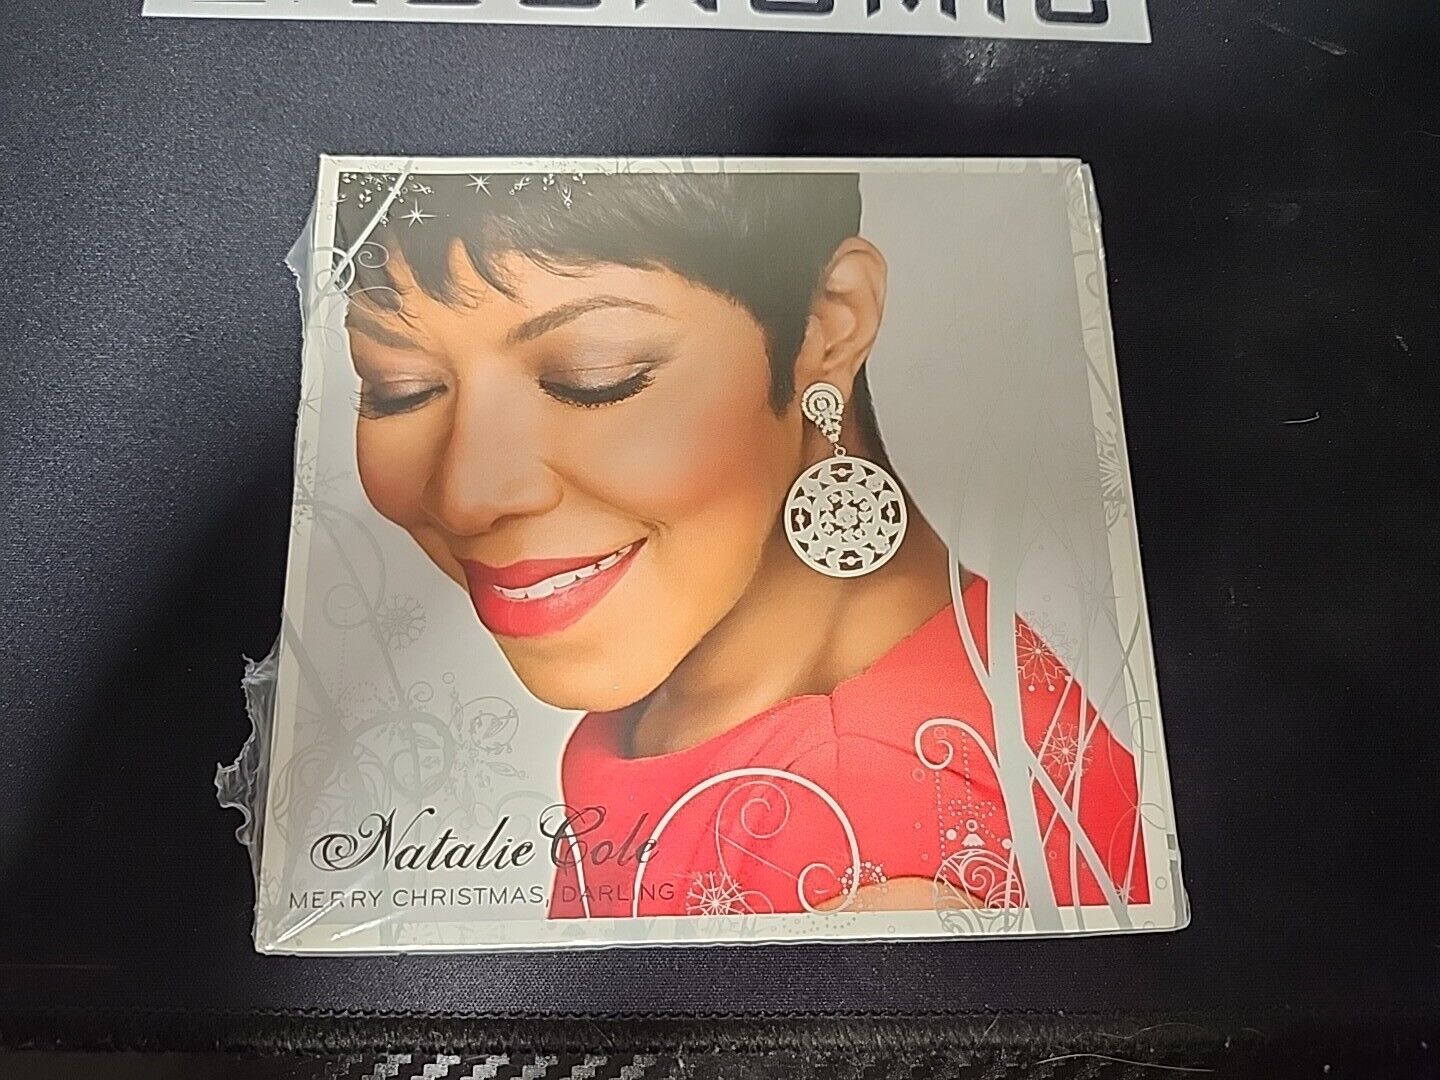 Natalie Cole - Merry Christmas Darling (CD) *Brand New*